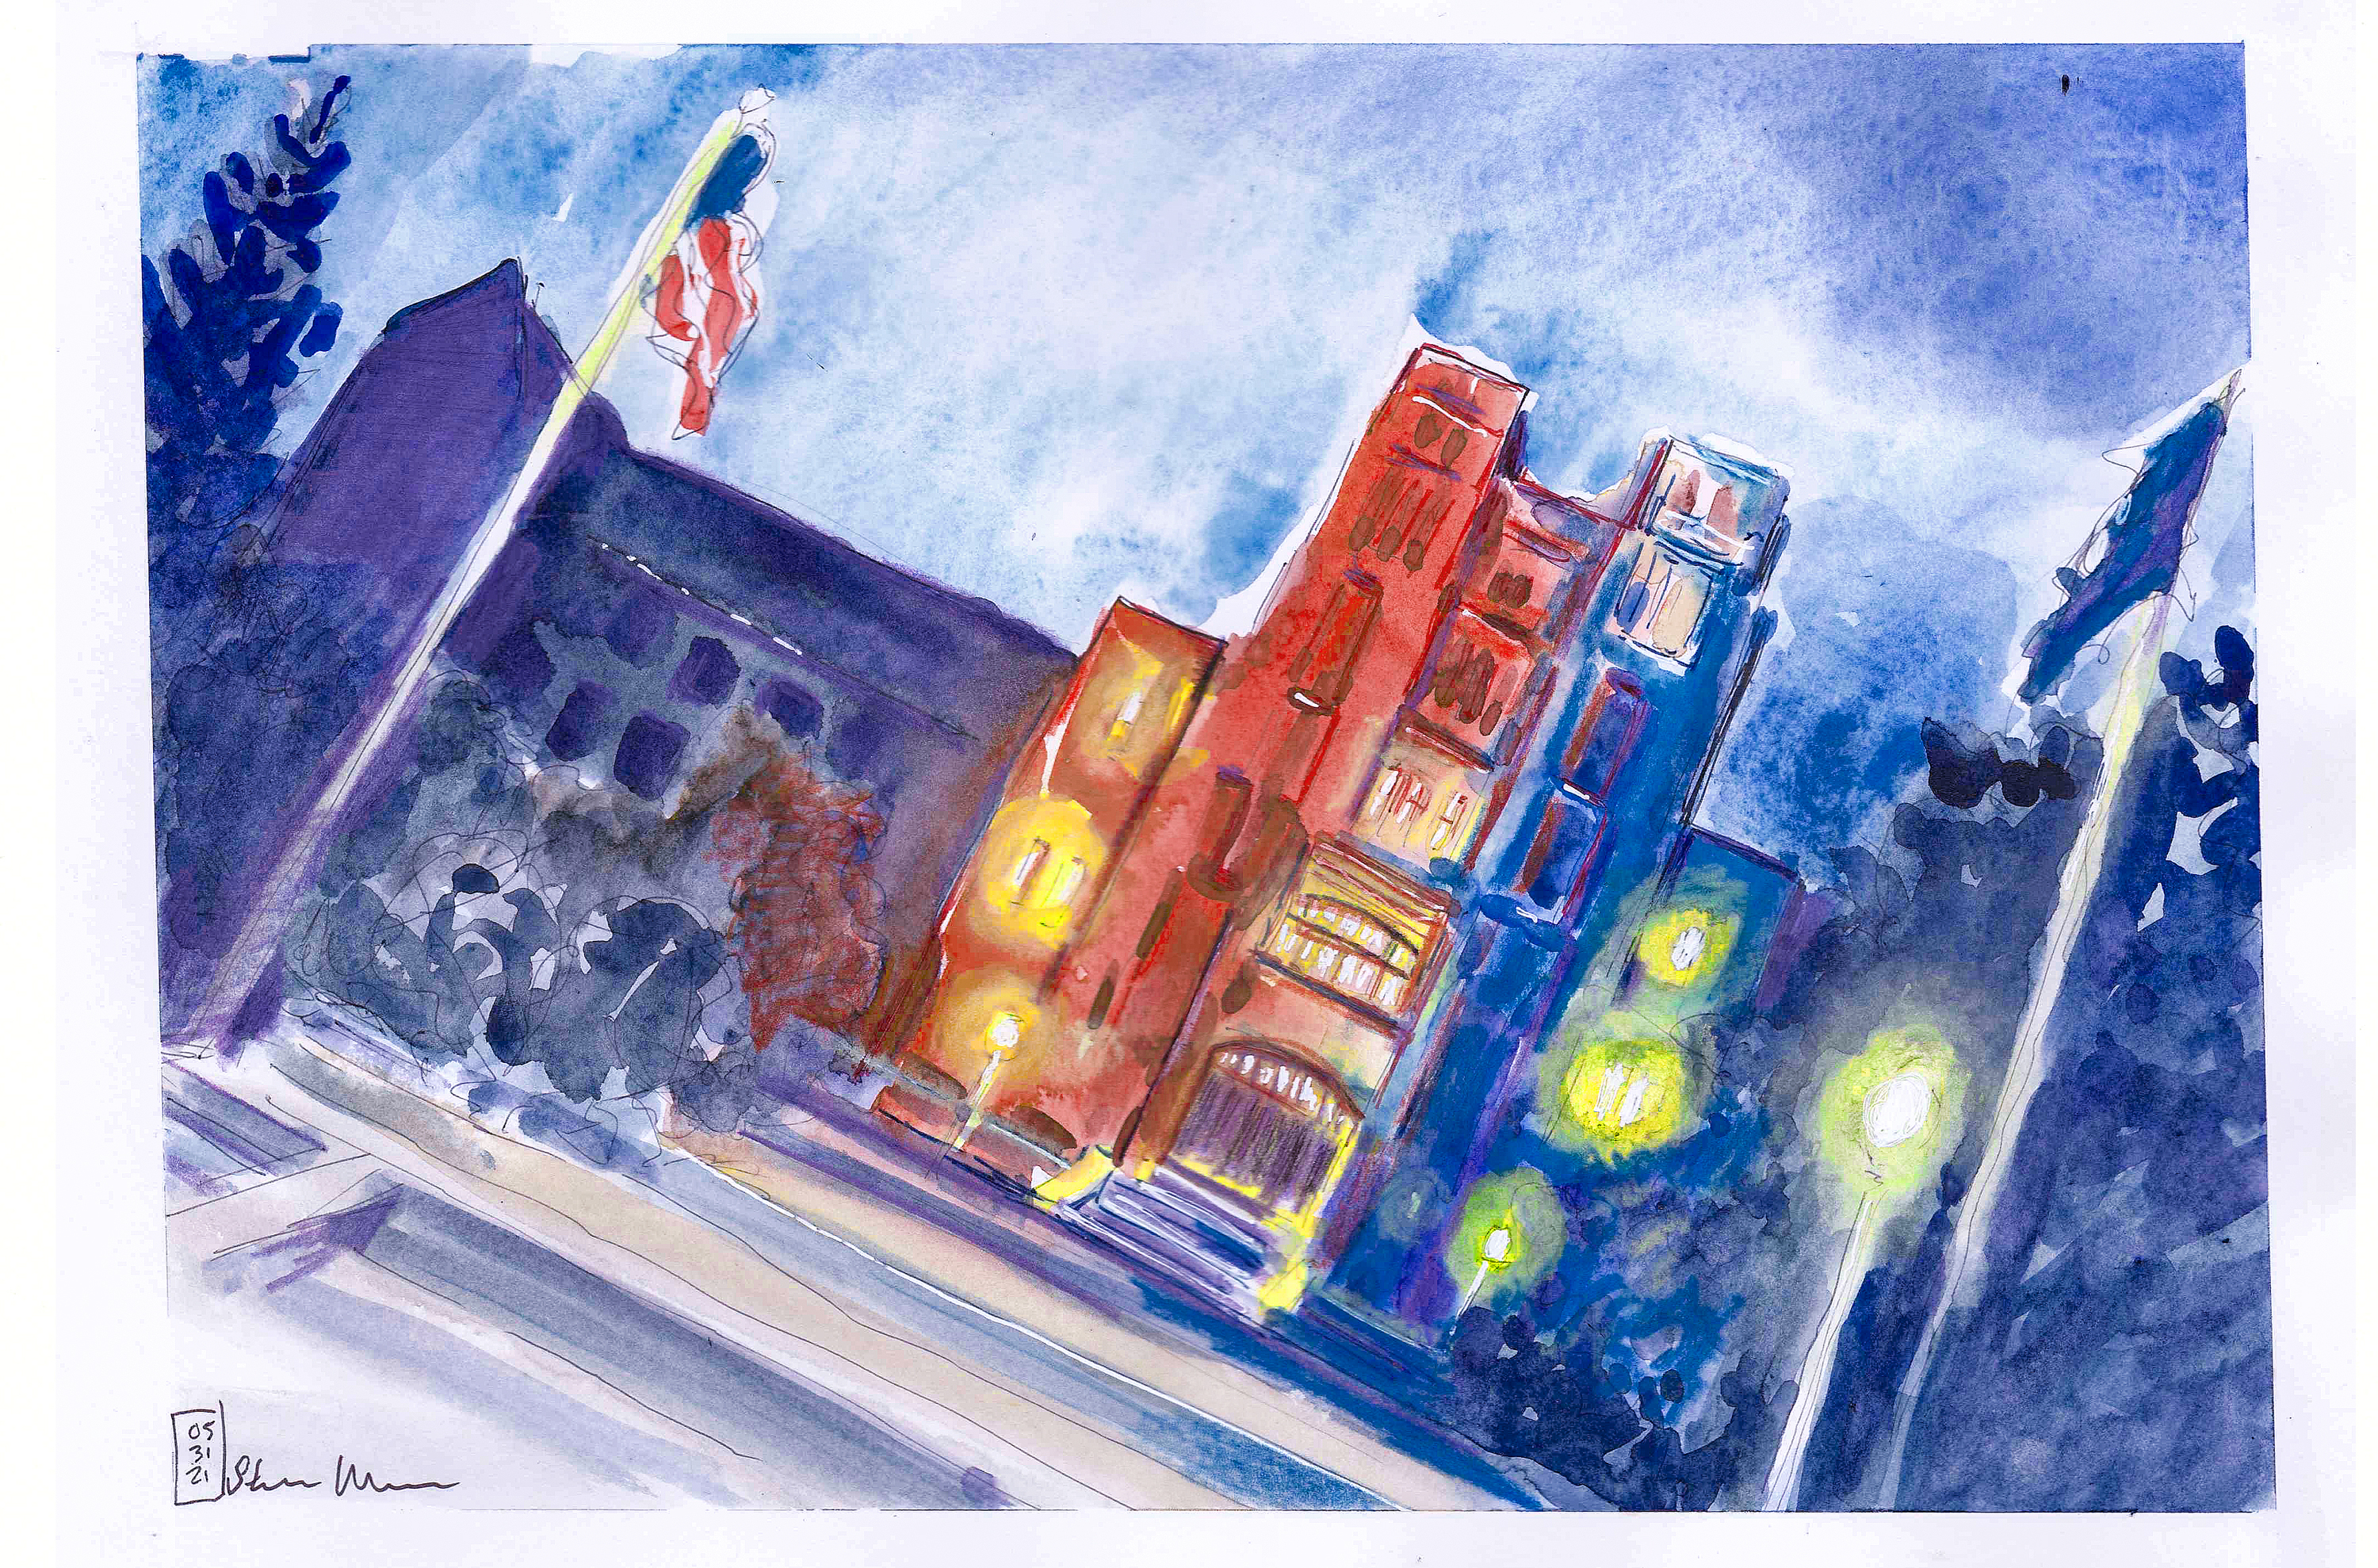 Illustration in ink and watercolor of Burruss Hall with special Memorial Day llghts in red, white and blue